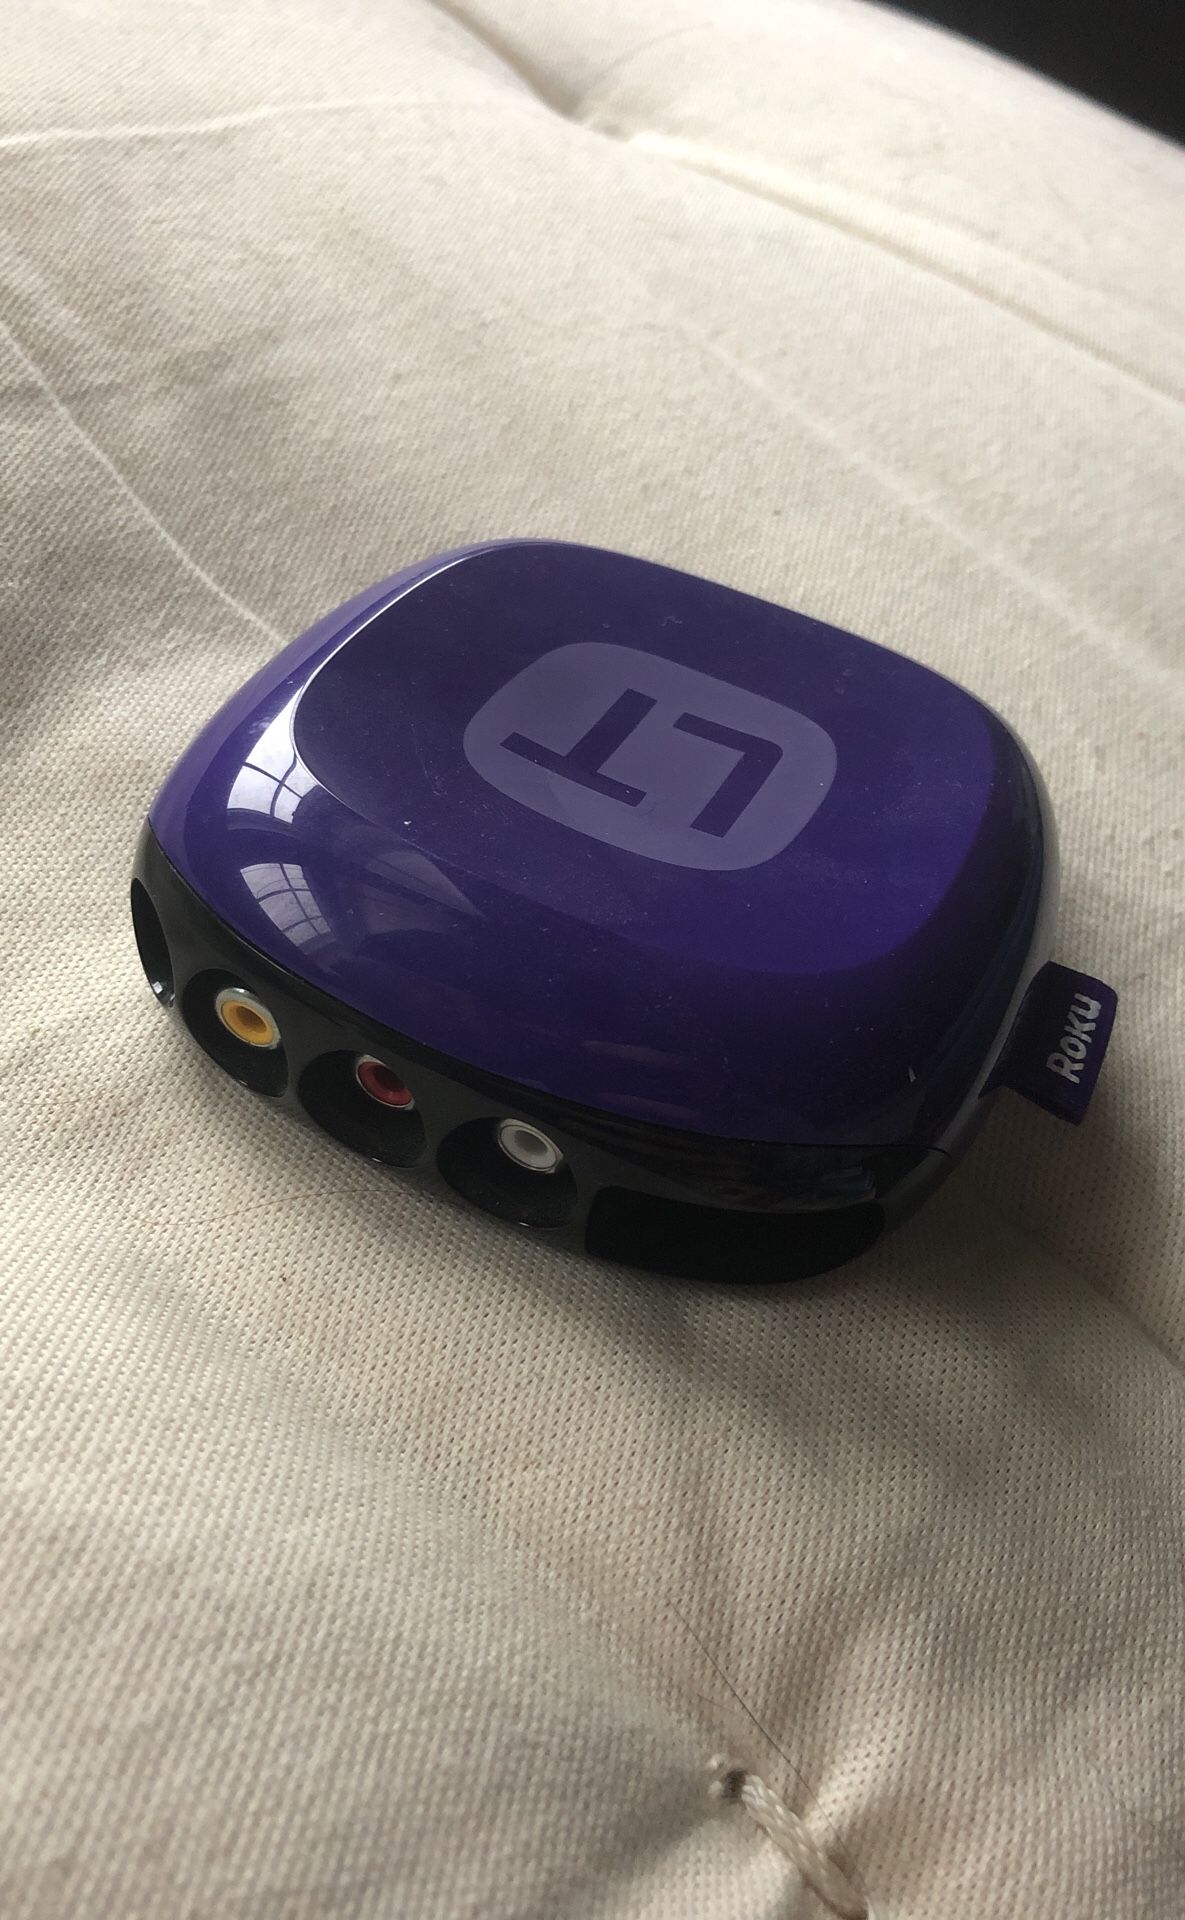 ROKU box (plugs not included)